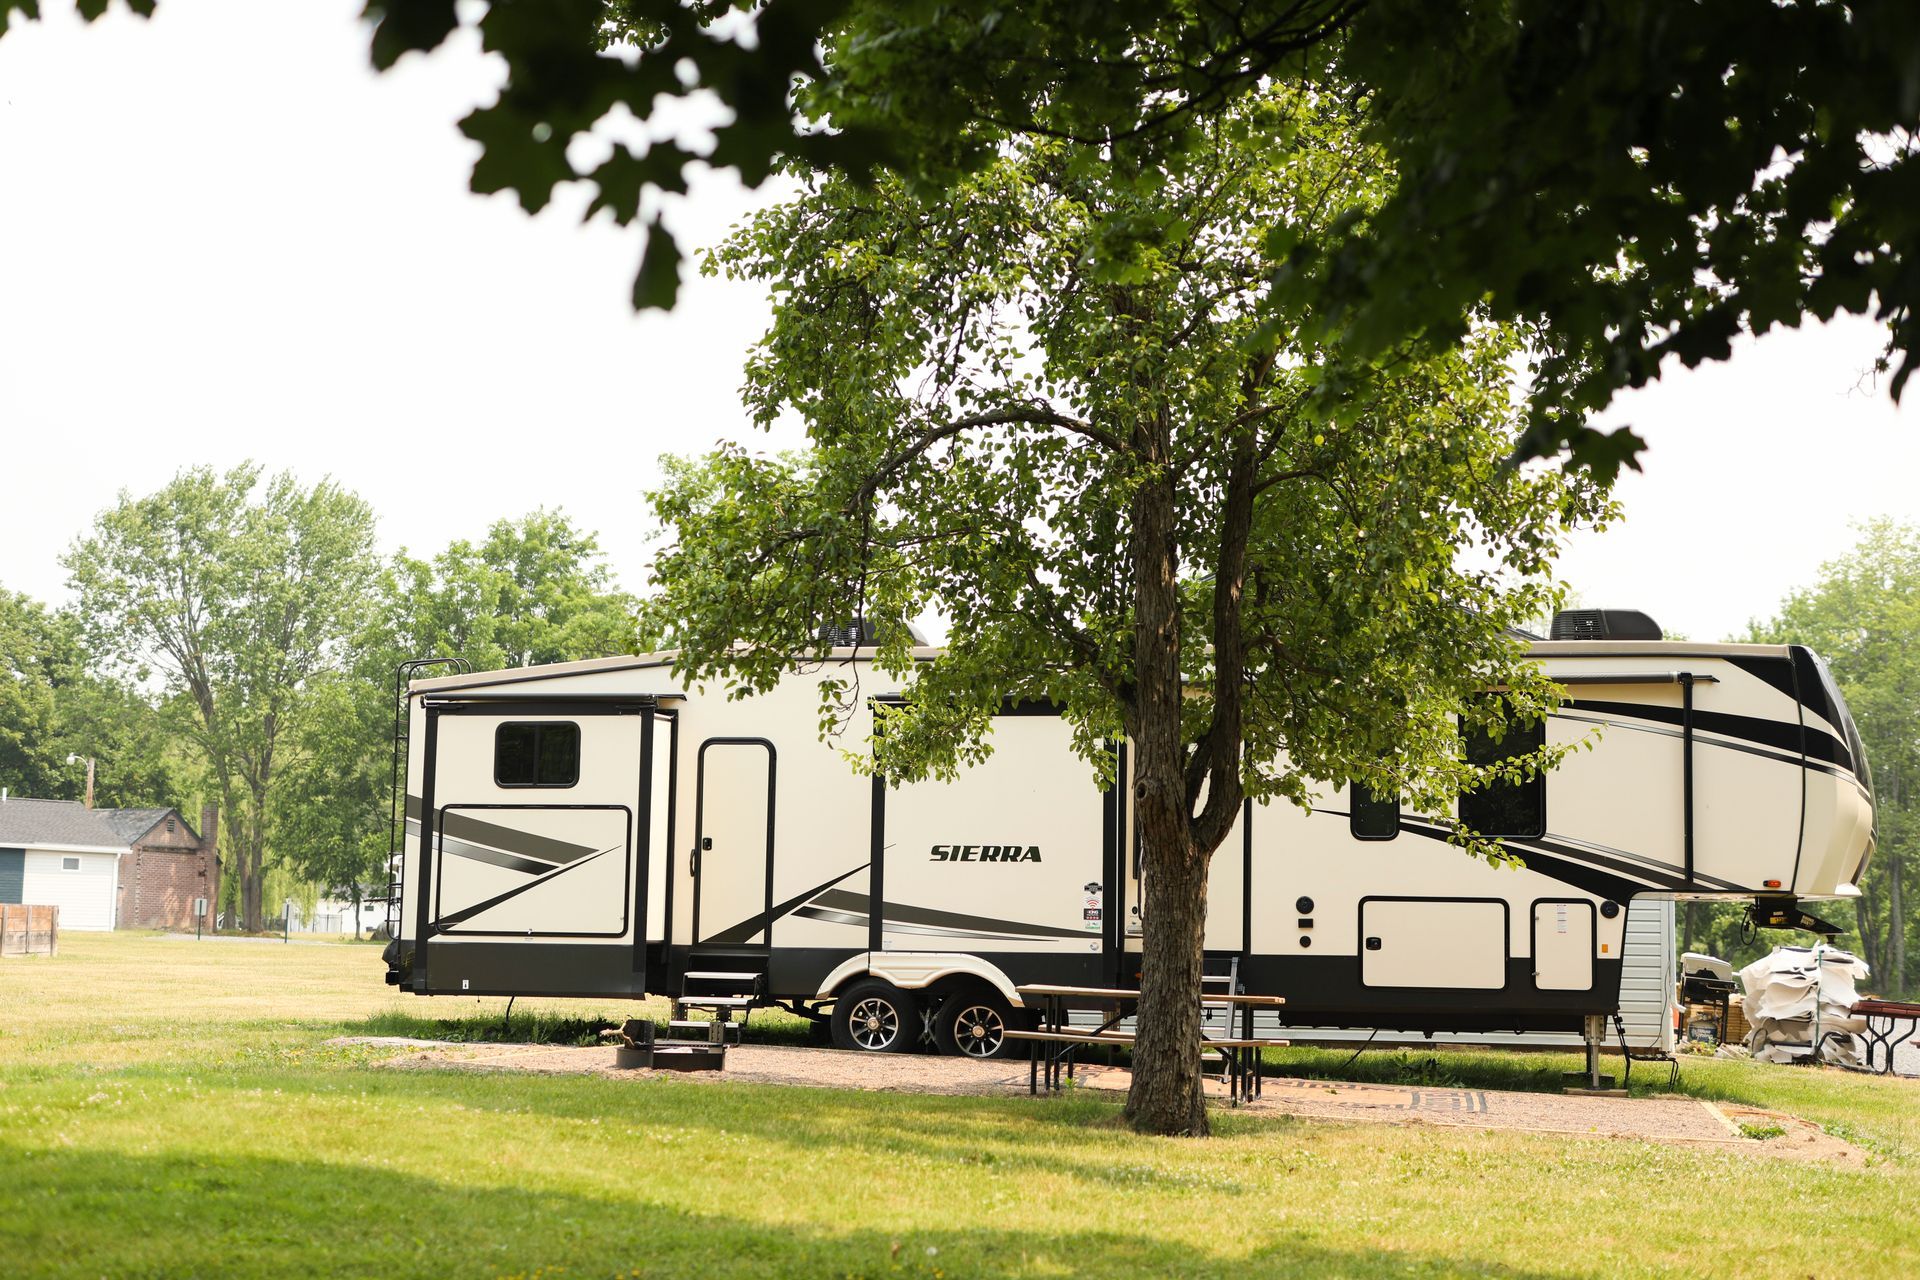 A rv is parked under a tree in a grassy field.